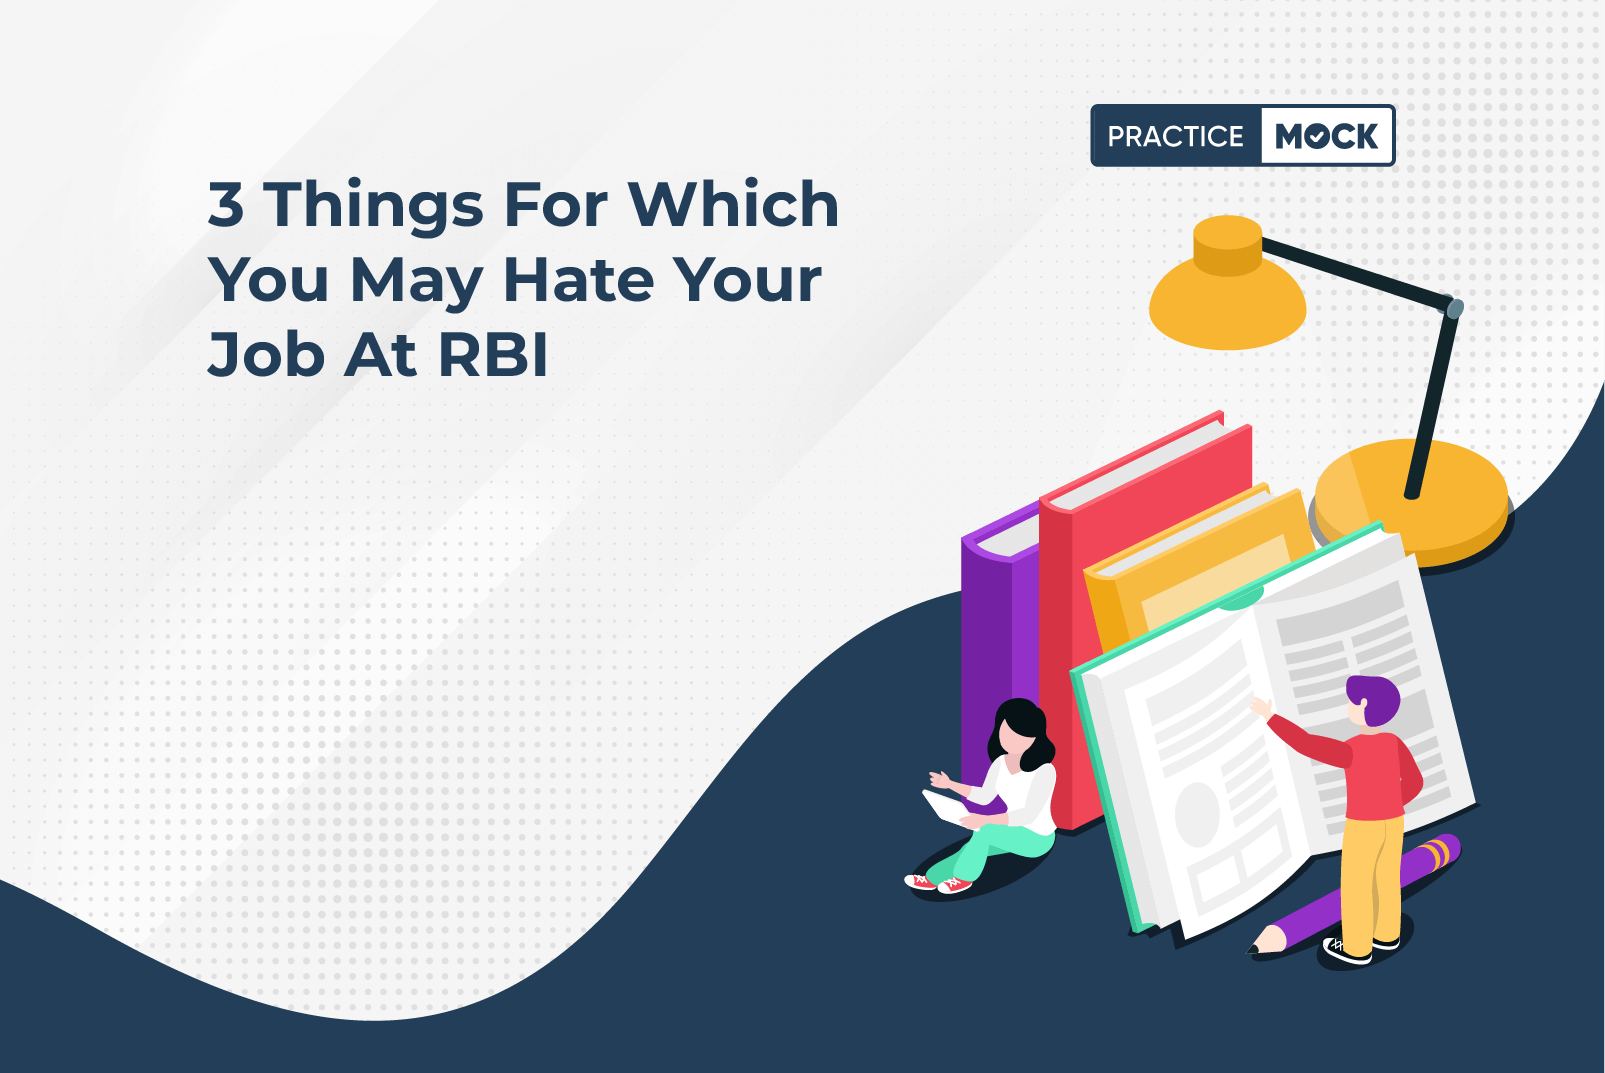 3 Things For Which You May Hate Your Job At RBI